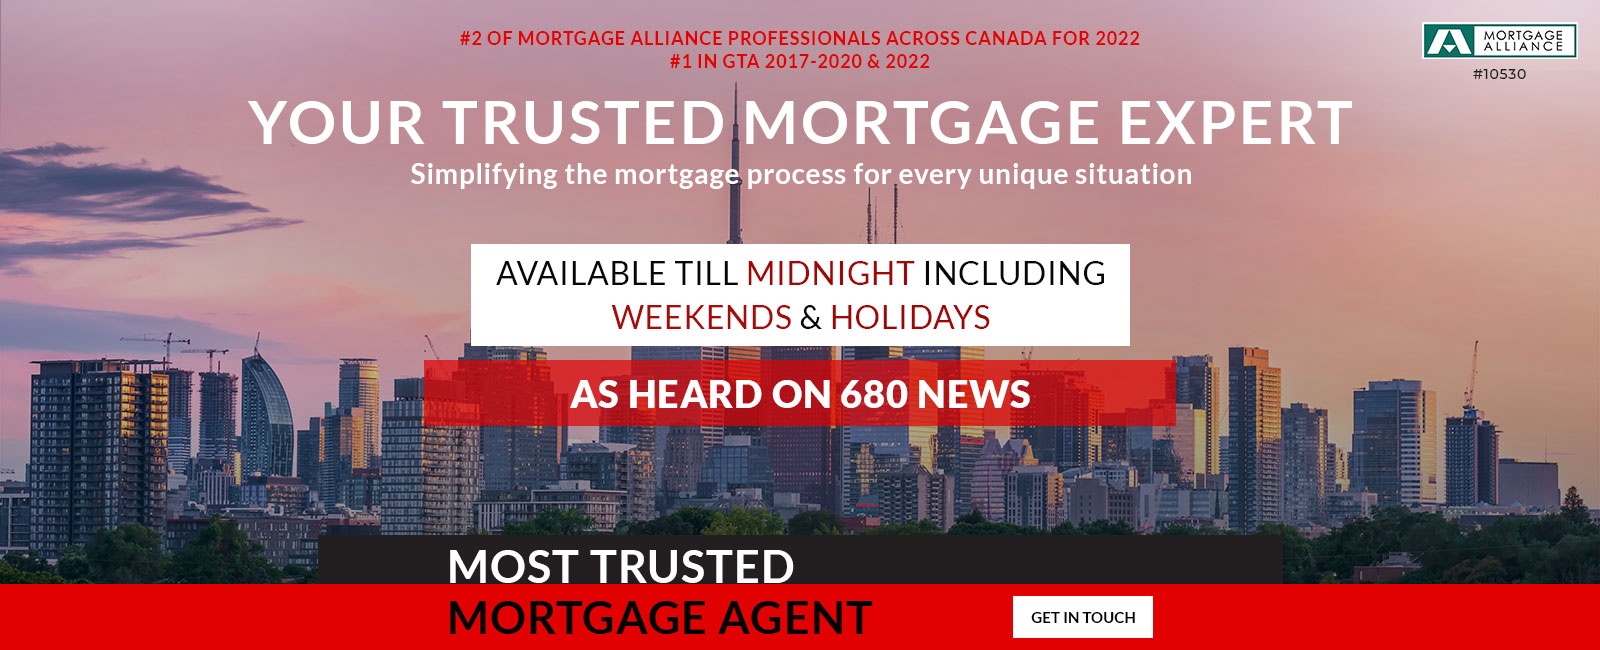 canadian mortgage services